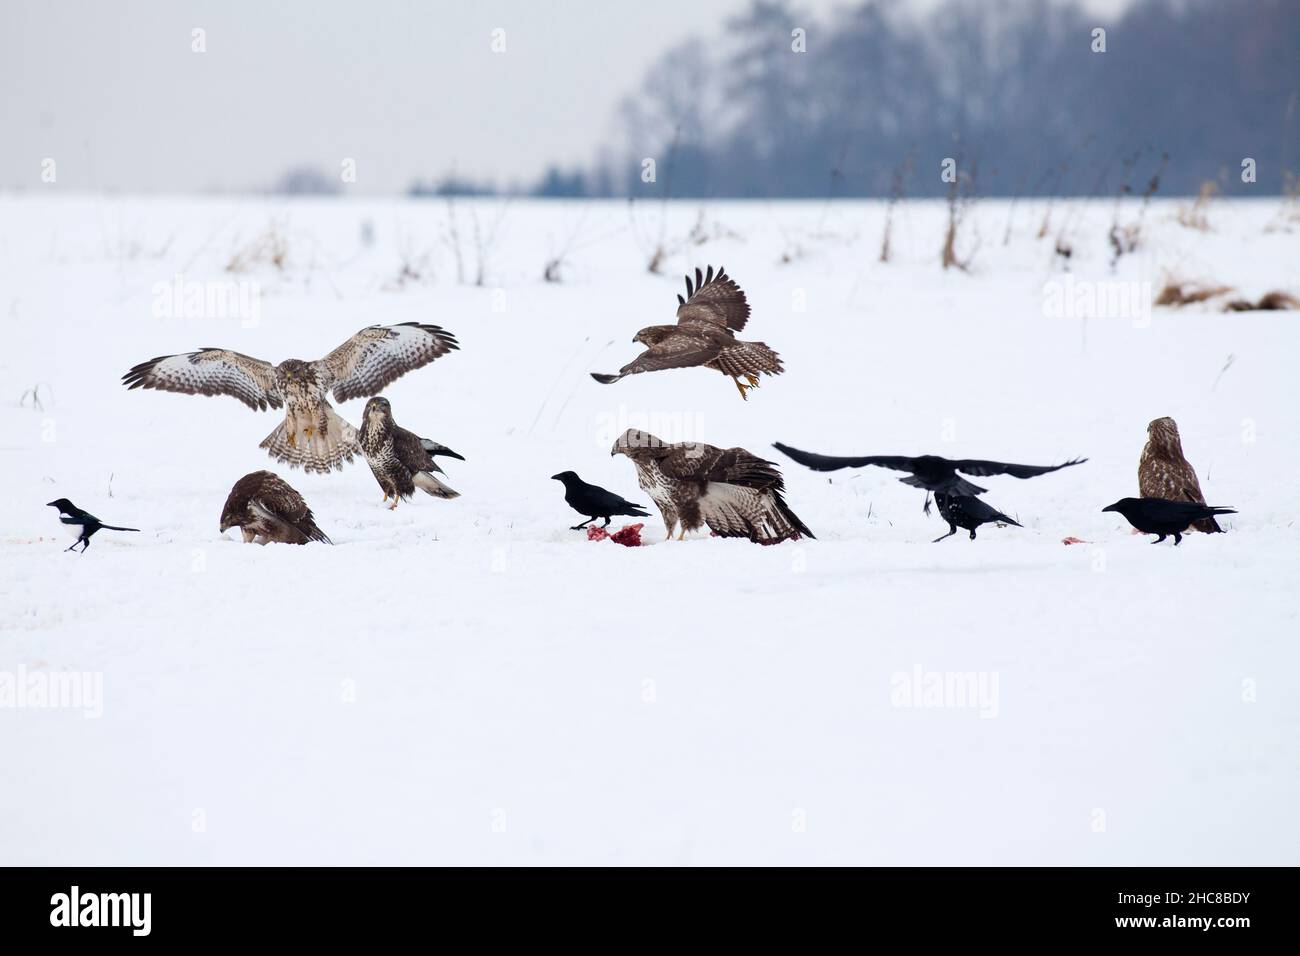 Common Buzzard, (Buteo buteo), carrion crows and Magpie, feeding on carrion, on snowy field, in winter, Lower Saxony, Germany Stock Photo